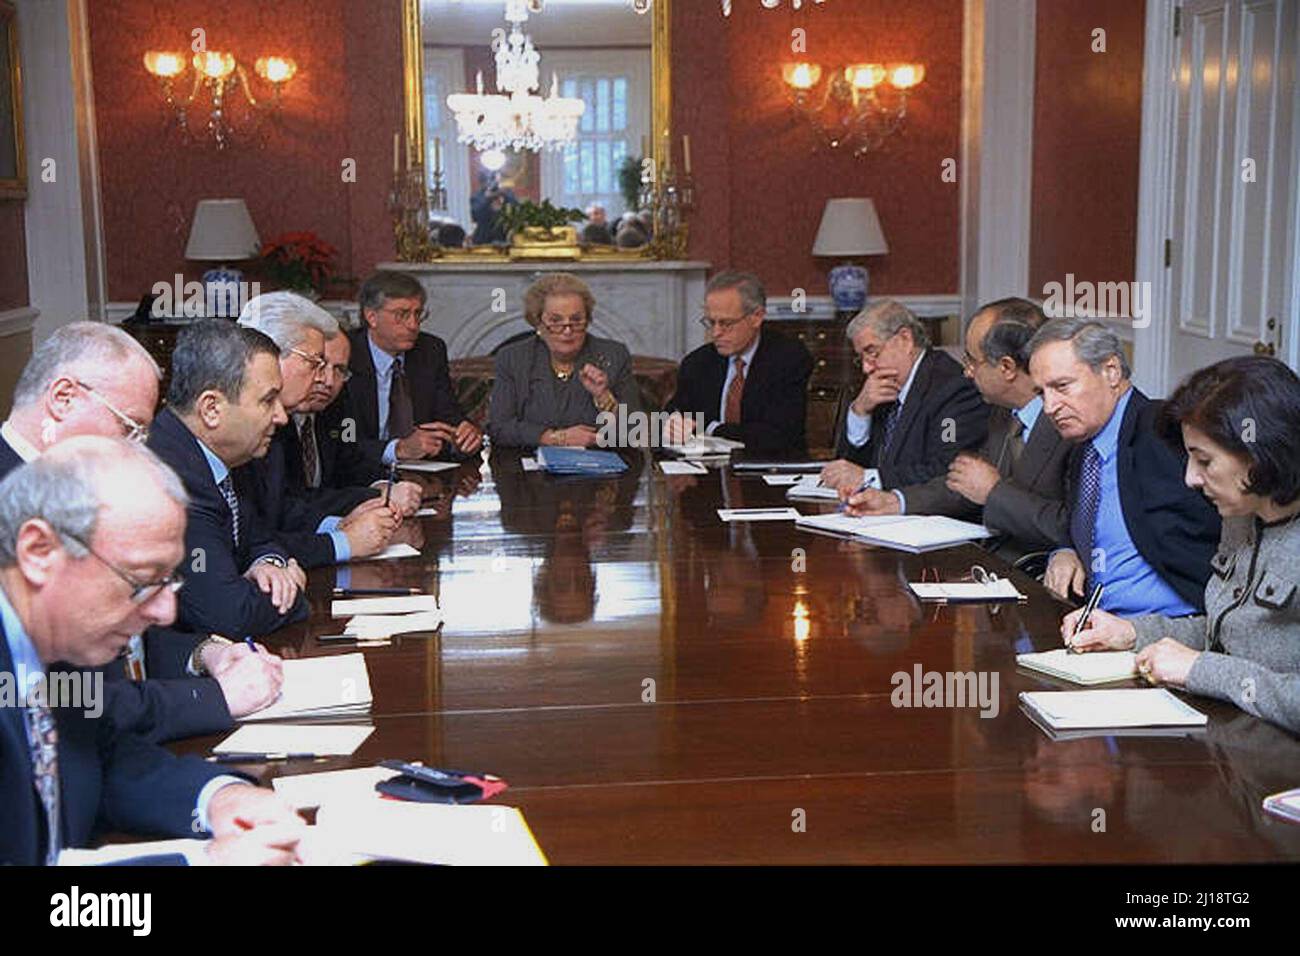 Washington, DC - December 16, 1999 -- Israeli and Syrian Peace Negotiations at Blair House, Washington, DC on December 16, 1999. Seated from Left to Right: Uri Sagui, Danny Yatom, Prime Minister Ehud Barak of Israel, Foreign Minister David Levy of Israel, United States Special Envoy Dennis Ross, United States Secretary of State Madeleine Albright, Ambassador to Israel-Designate Martin Indyk, Ambassador Walid Moualem of Syria, Riyad Daoudi, Foreign Minister Farouk al-Sharaa of Syria, Bouthaina Sha-ban.Credit: Sharon Farmer - White House via CNP/Sipa USA Credit: Sipa USA/Alamy Live News Stock Photo